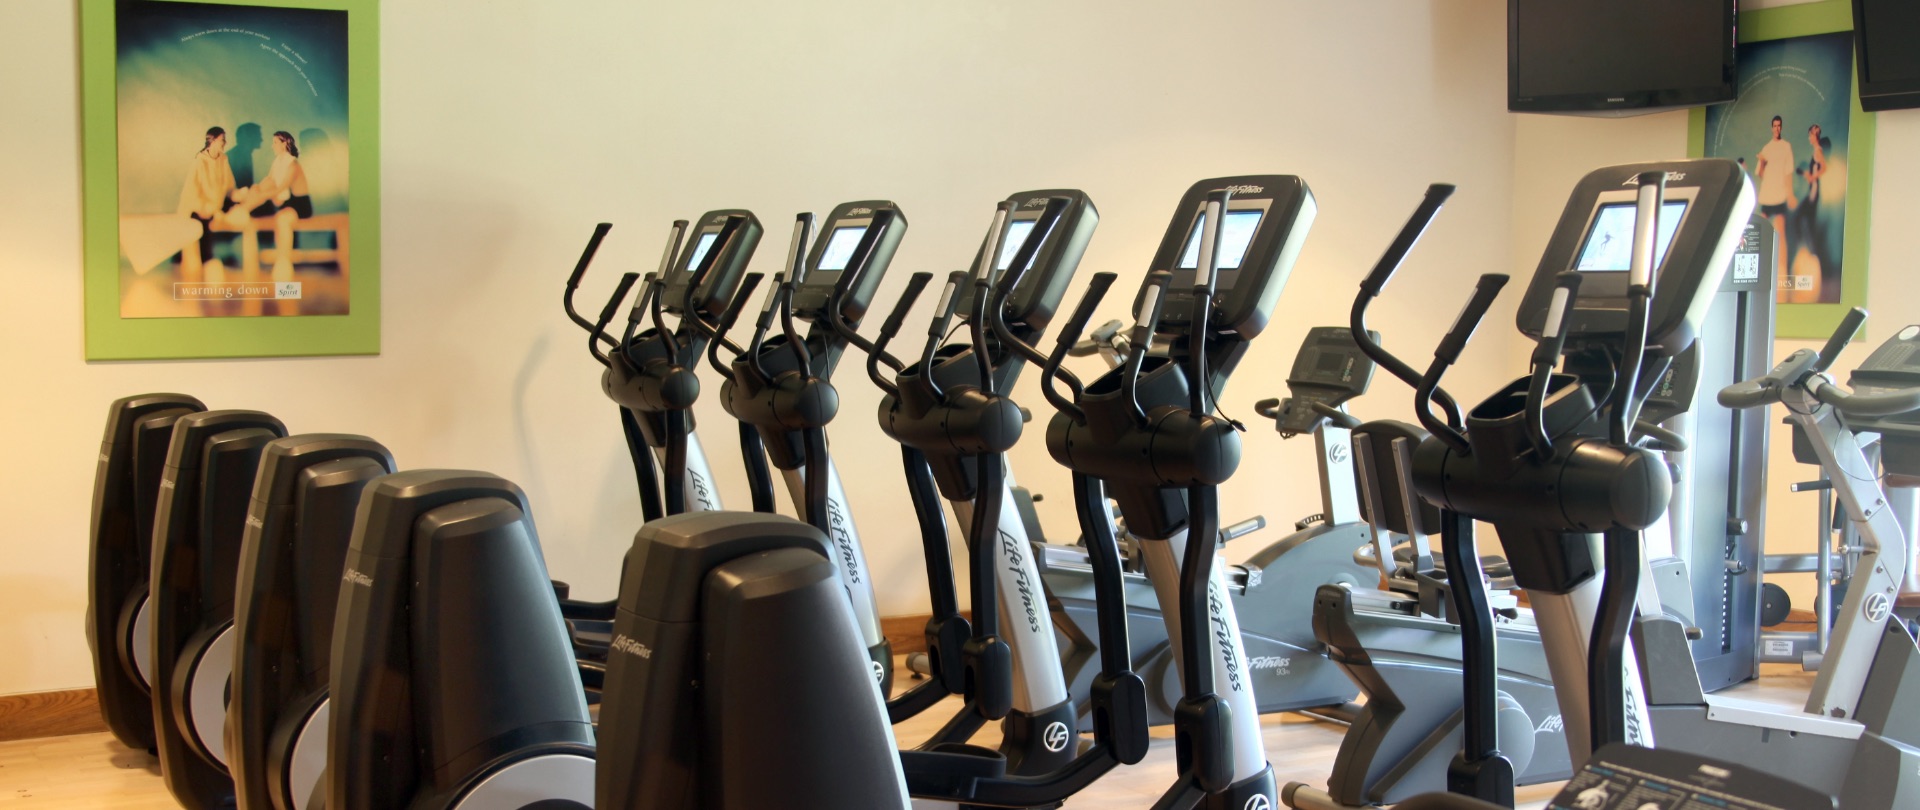 Express Fitness Club – A state of the art Fitness Club at the